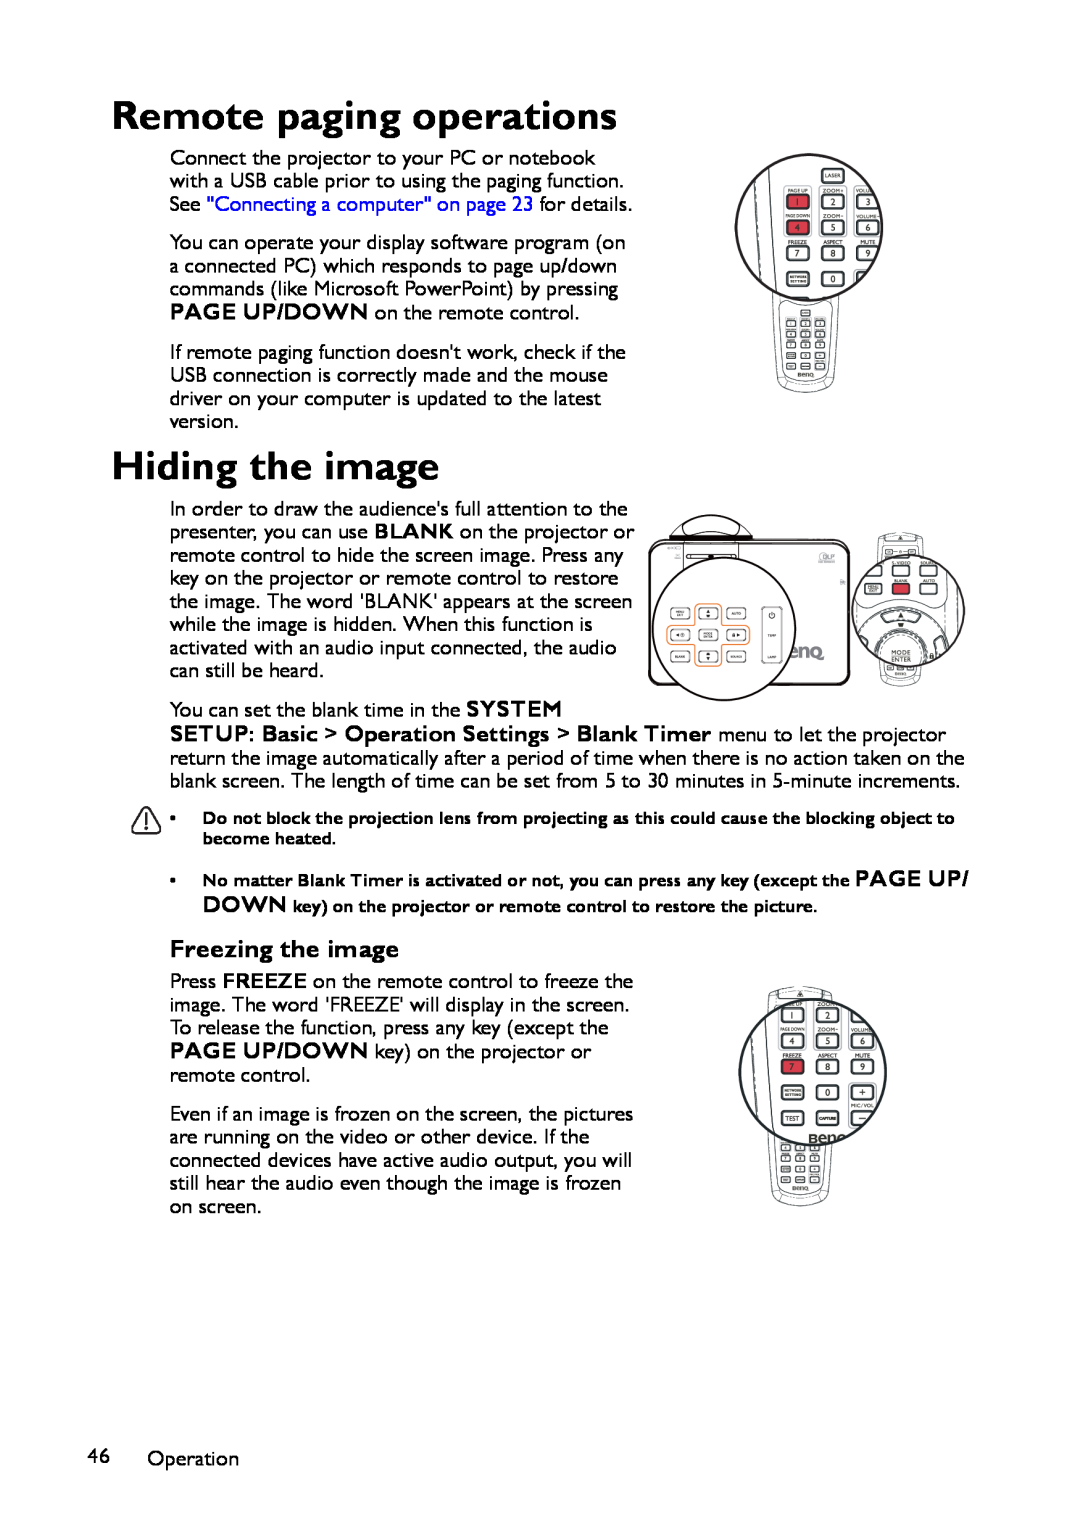 BenQ MP780 ST+, MW860USTi user manual Remote paging operations, Hiding the image, Freezing the image 